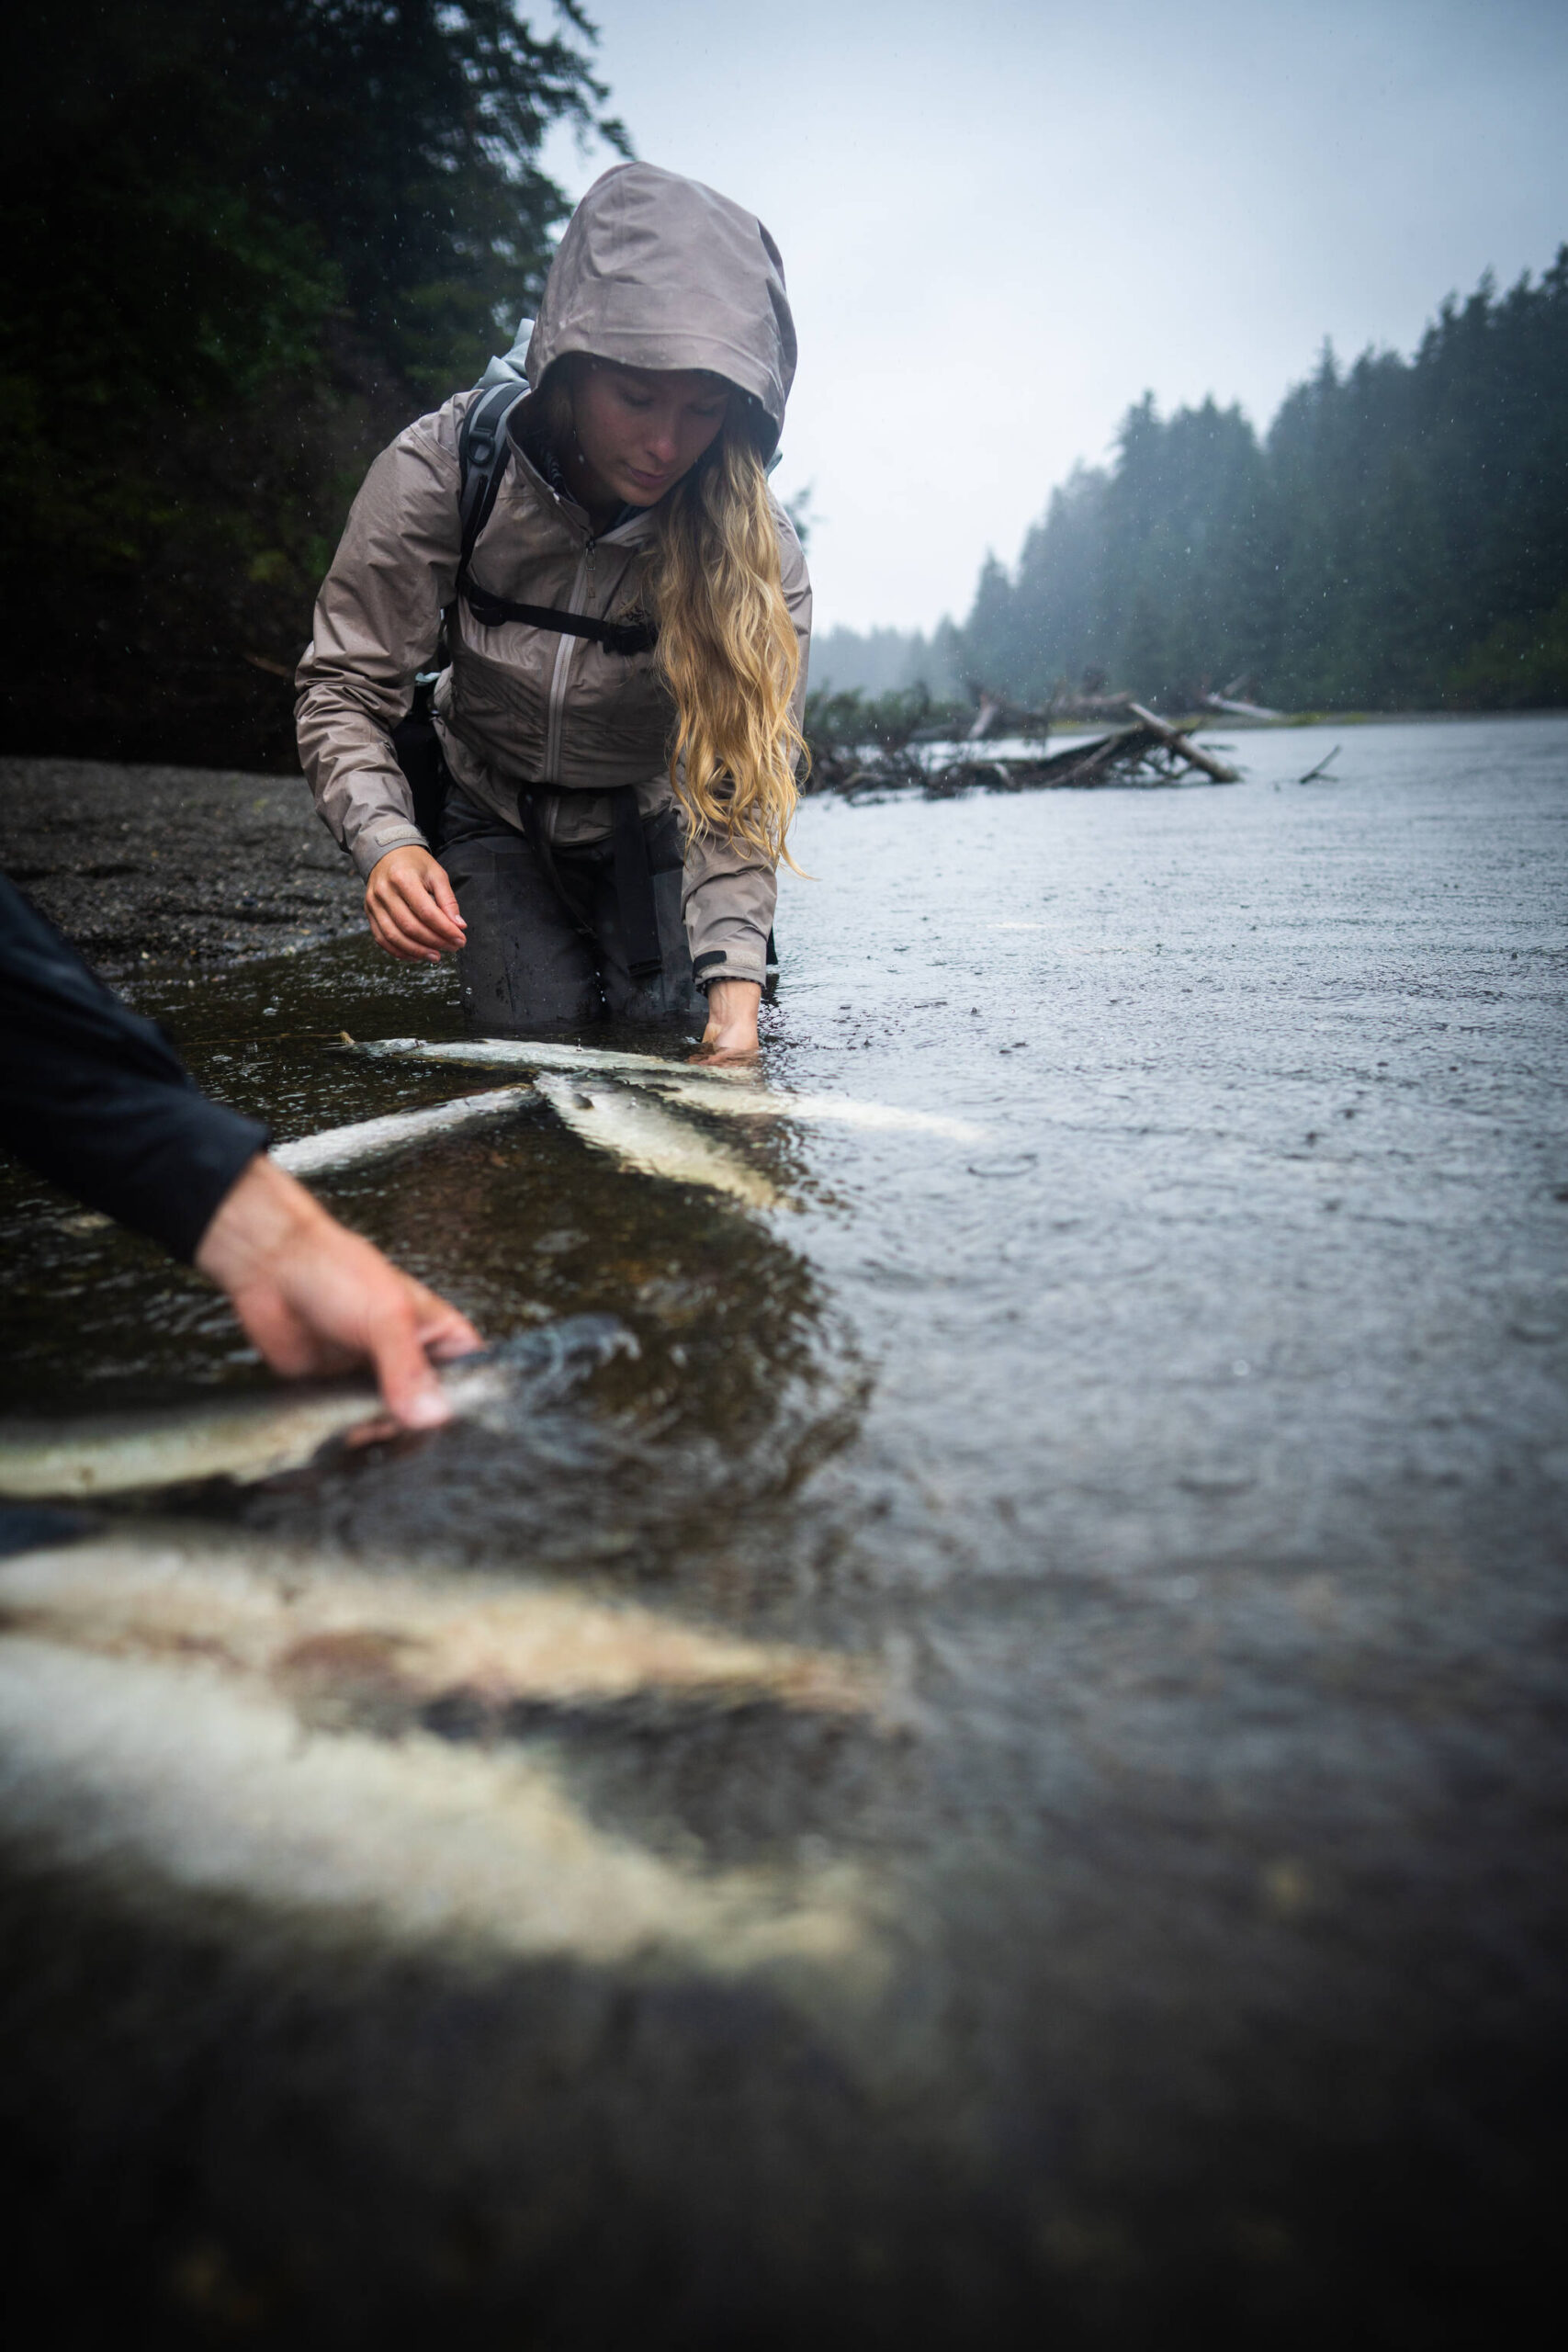 While working for the Yakutat Tlingit tribe, Jennifer Hanlon was able to secure funding starting in 2020 to hire a tribal fisheries biologist that would support the existing Yakutat River Rangers program. This program pairs a fish biologist (Havaleh Rohloff) hosted by the tribe with a fish biologist from the Yakutat Ranger District to spend time on local rivers collecting important data about fish resources, sharing stewardship guidelines with visiting anglers, and positioning the tribe with more data and resources to engage meaningfully on state and federal policy regarding fish populations. (Bethany Goodrich / Sustainable Southeast Partnership)